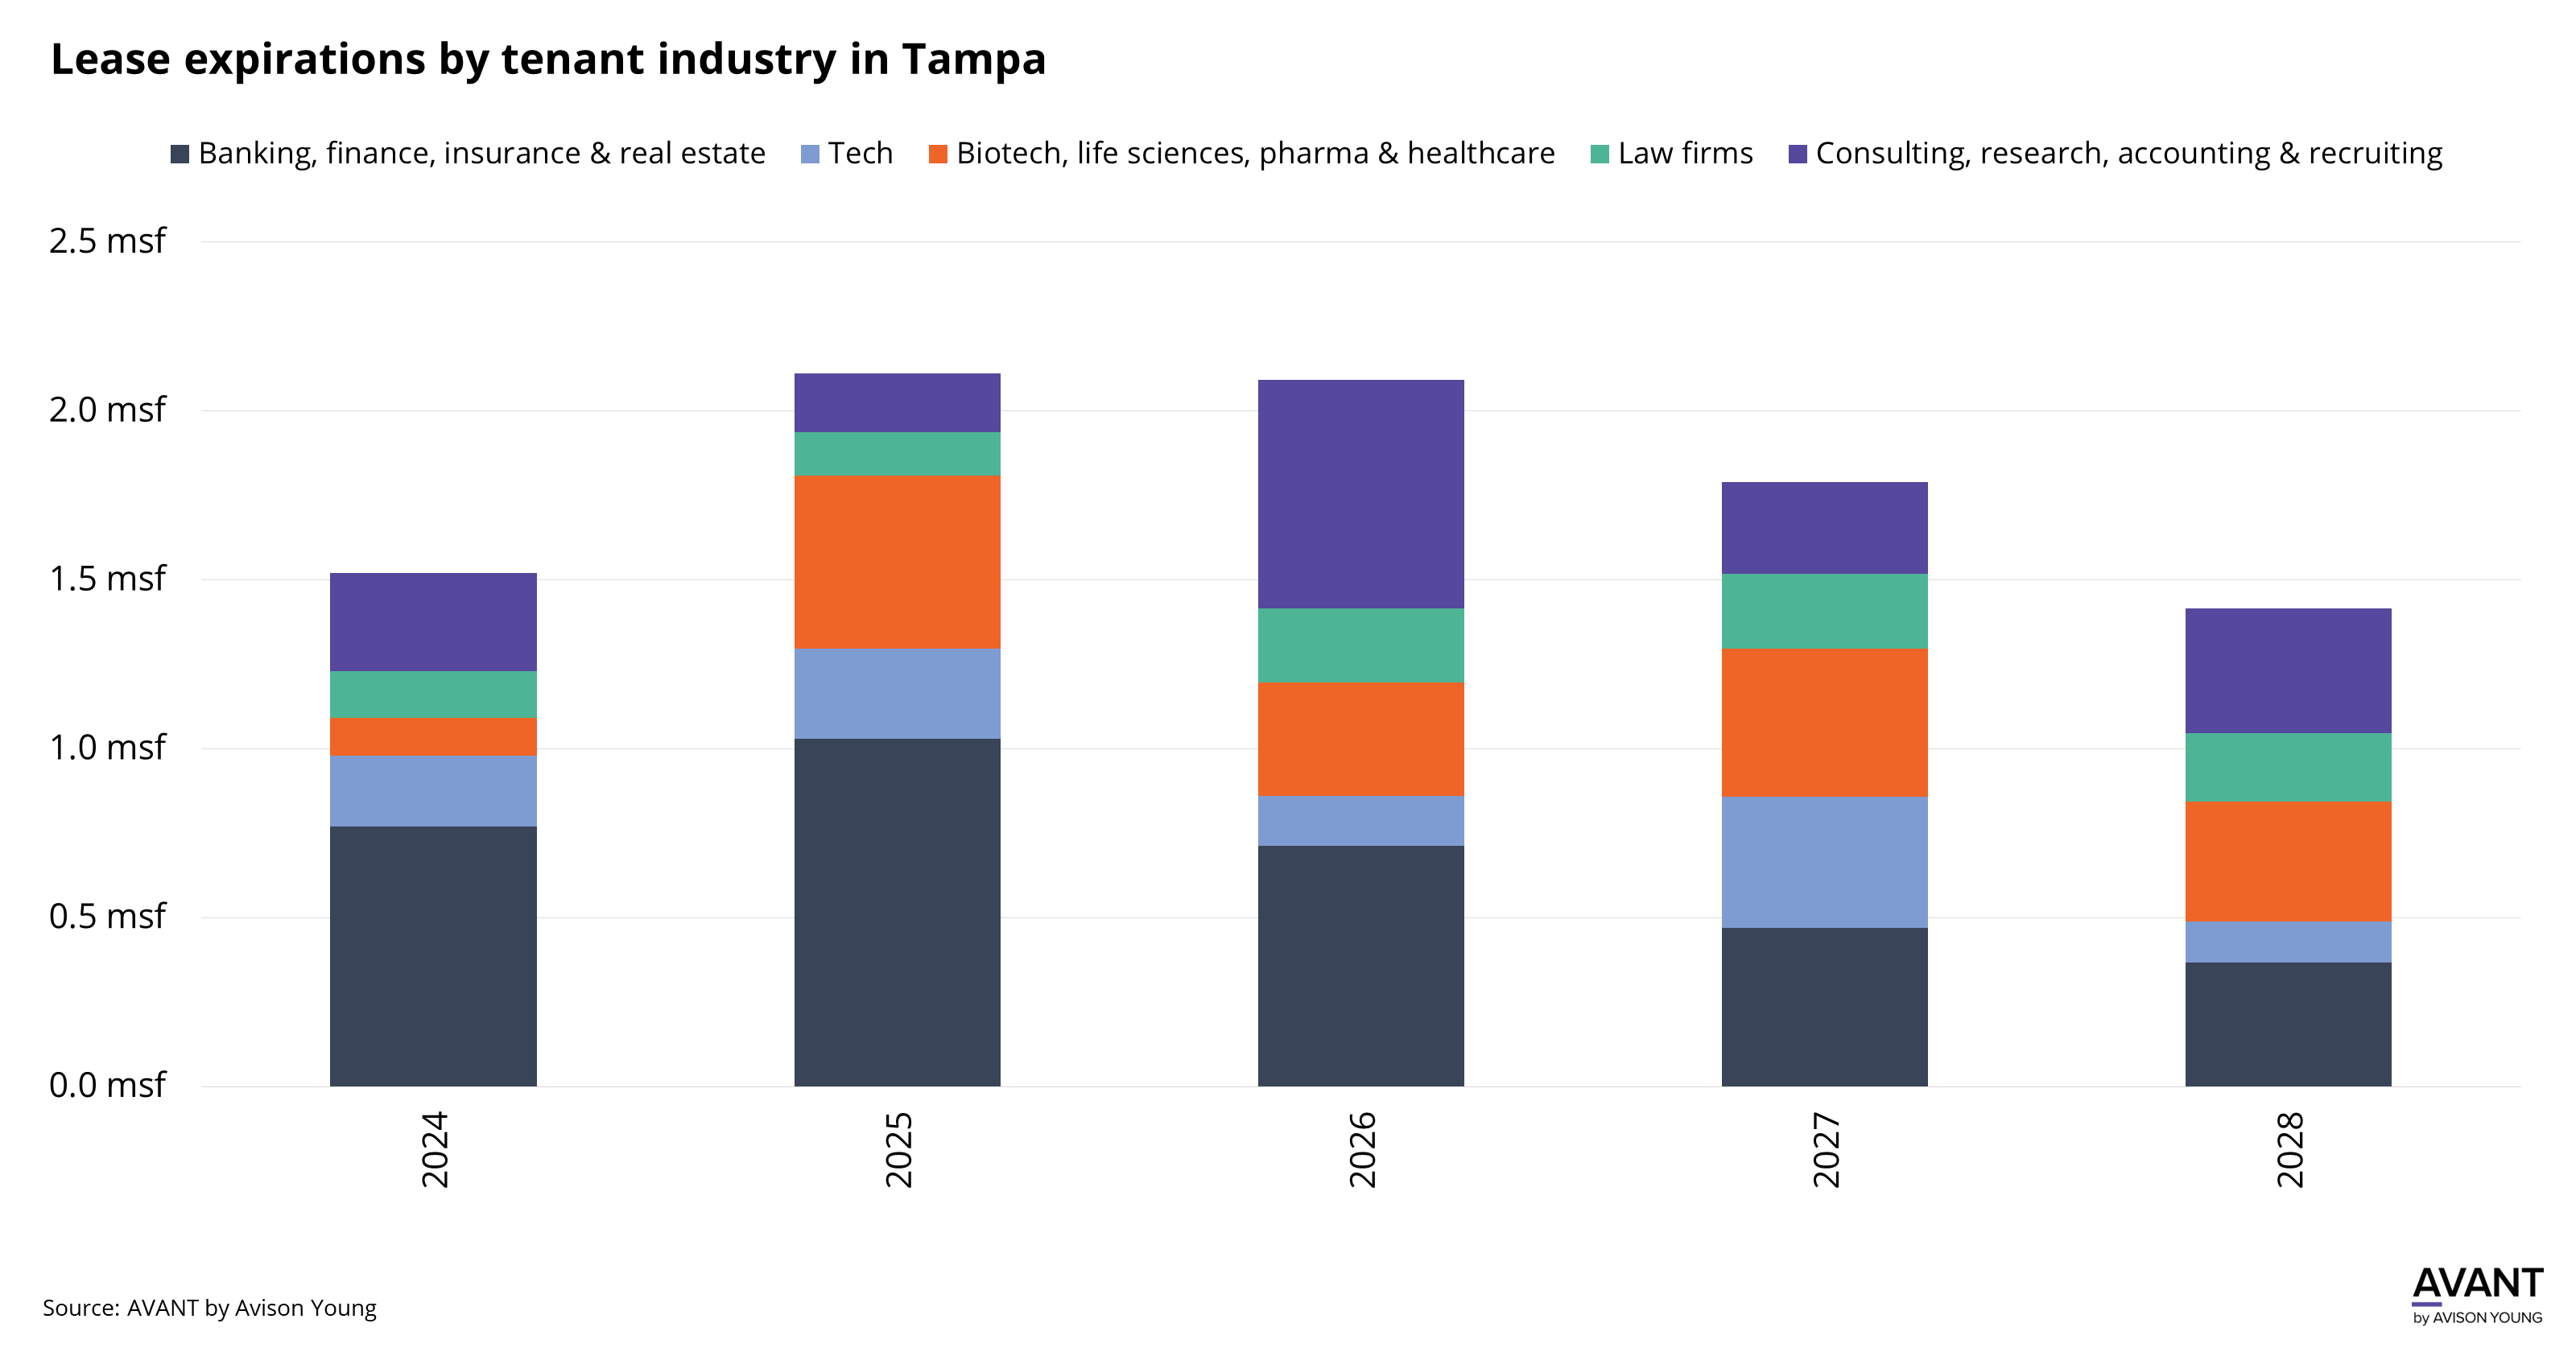 graph of lease expirations by tenant industry in Tampa from 2024 to 2028 in million square feet